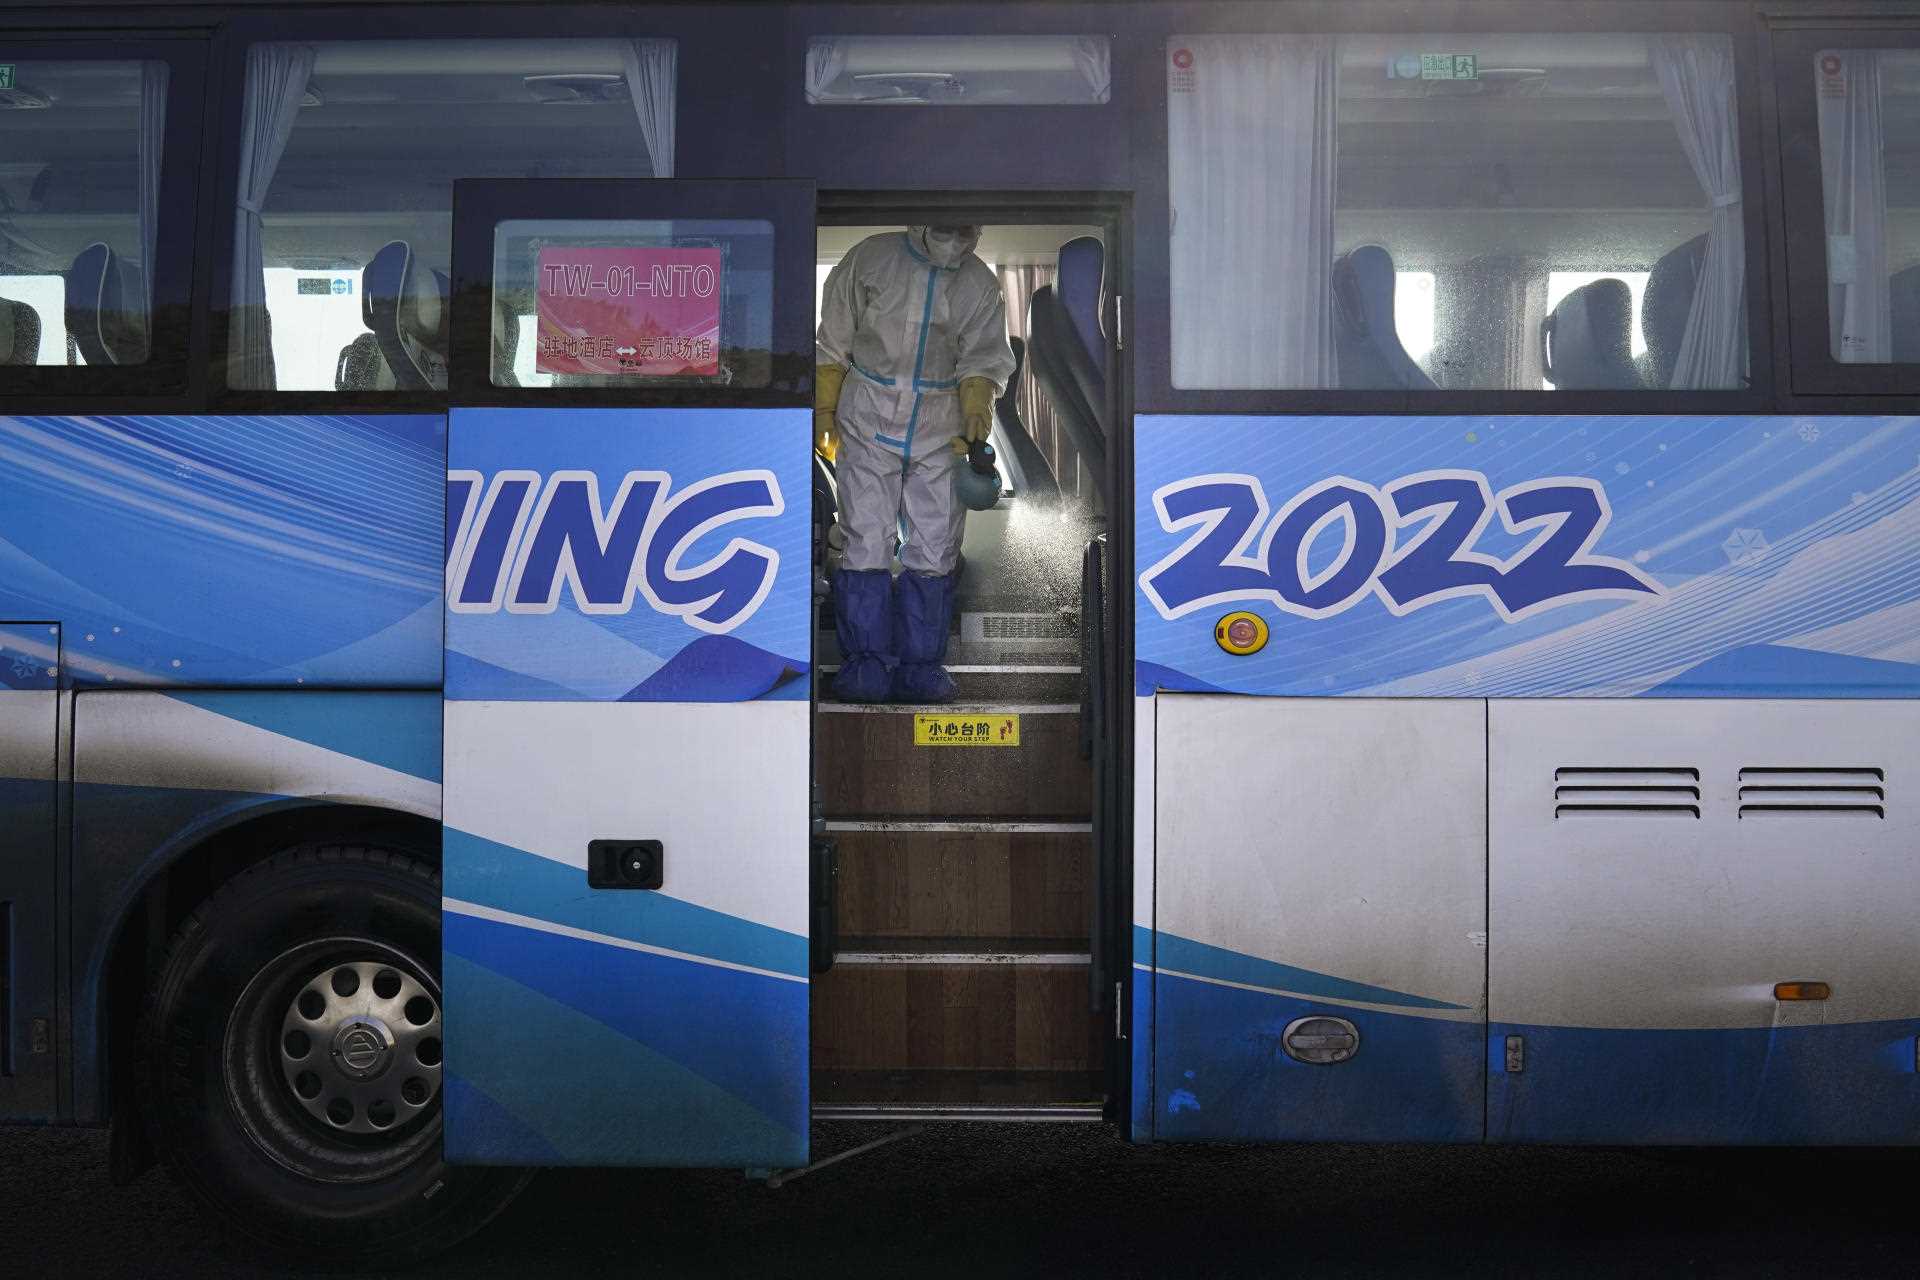 An employee disinfects one of the buses transporting participants to the Winter Olympics in Zhangjiakou on January 30.